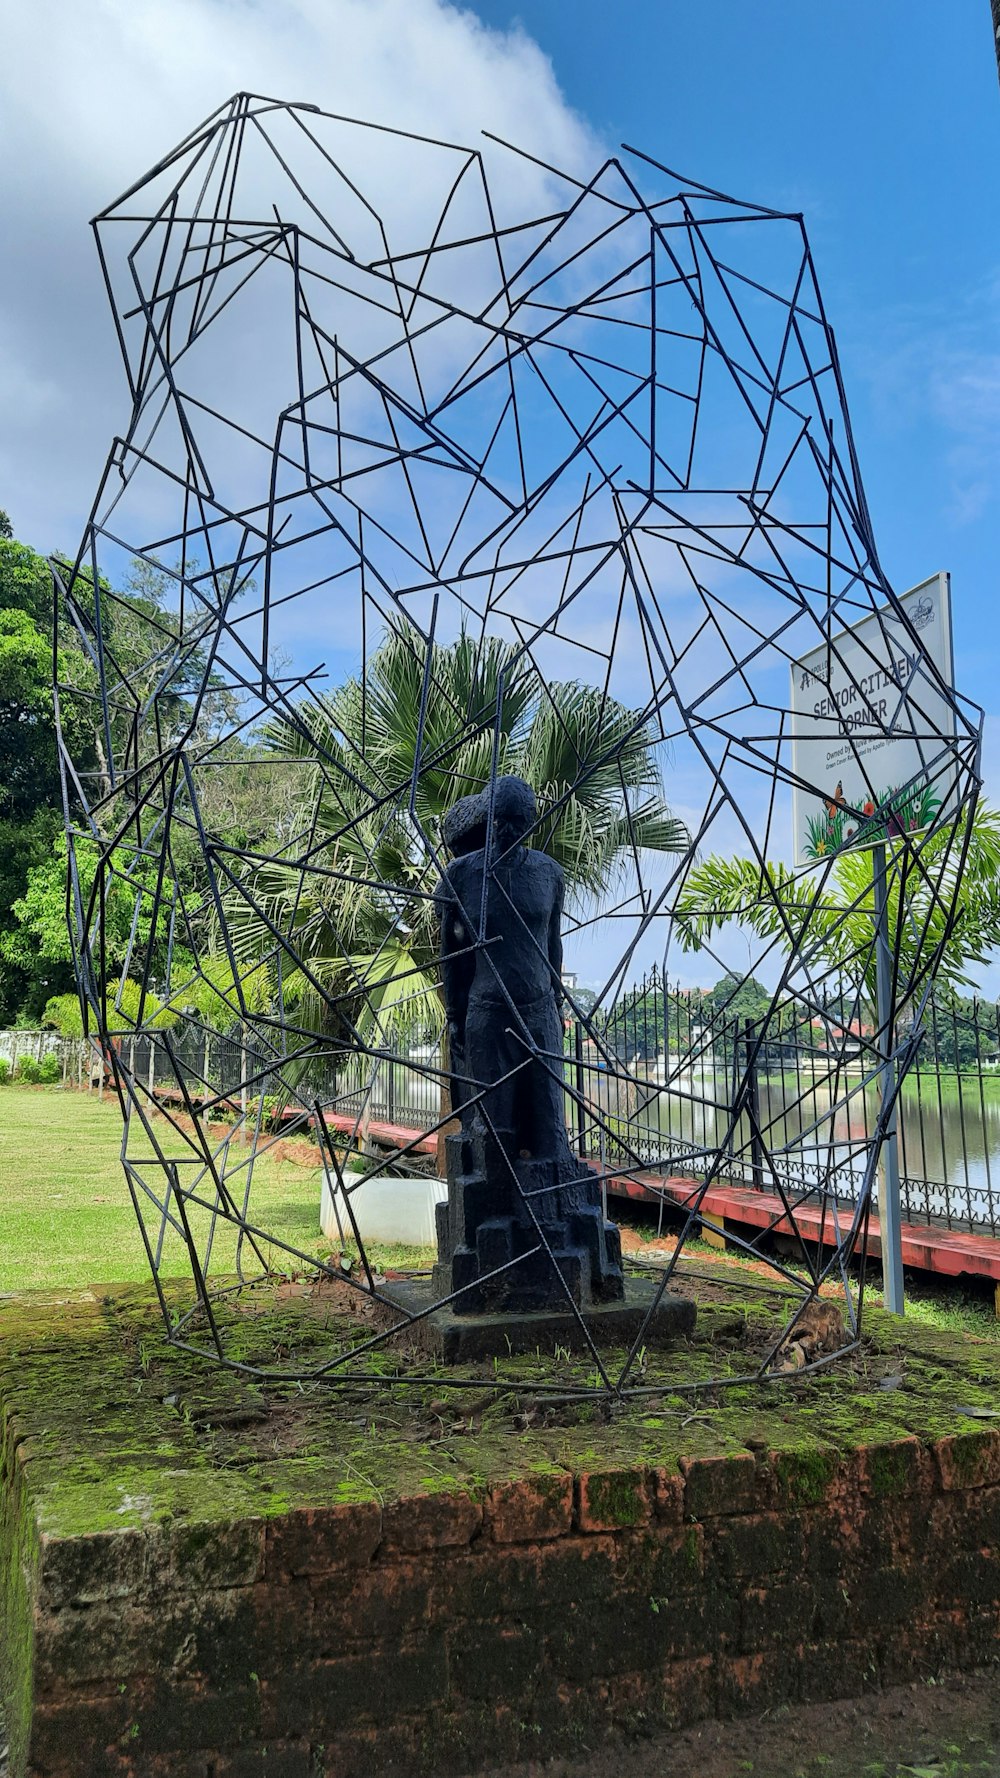 a sculpture in the middle of a park